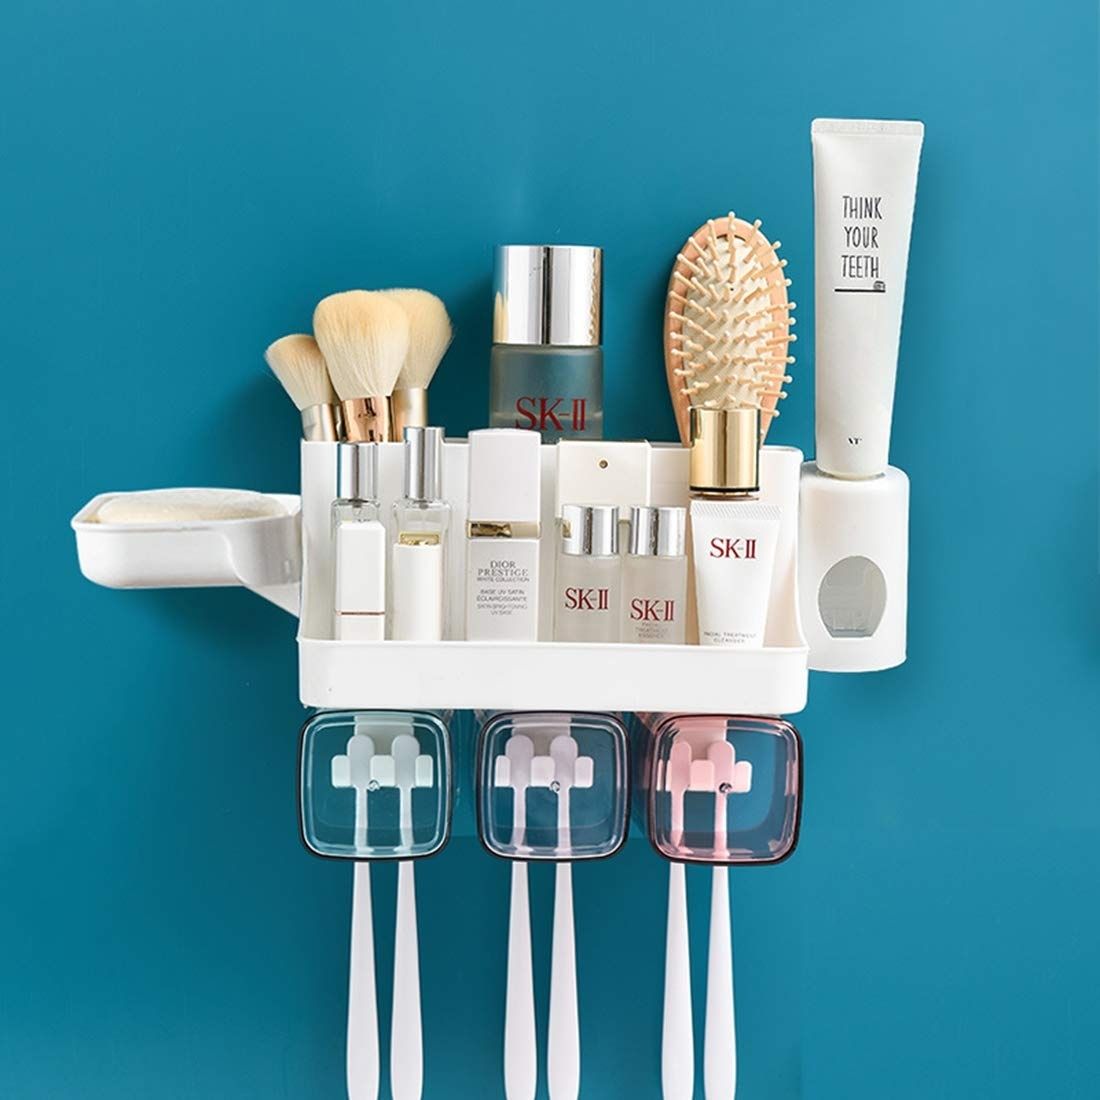 Maharsh Wall Mountable Durable and Stable Plastic Toothbrush Holder